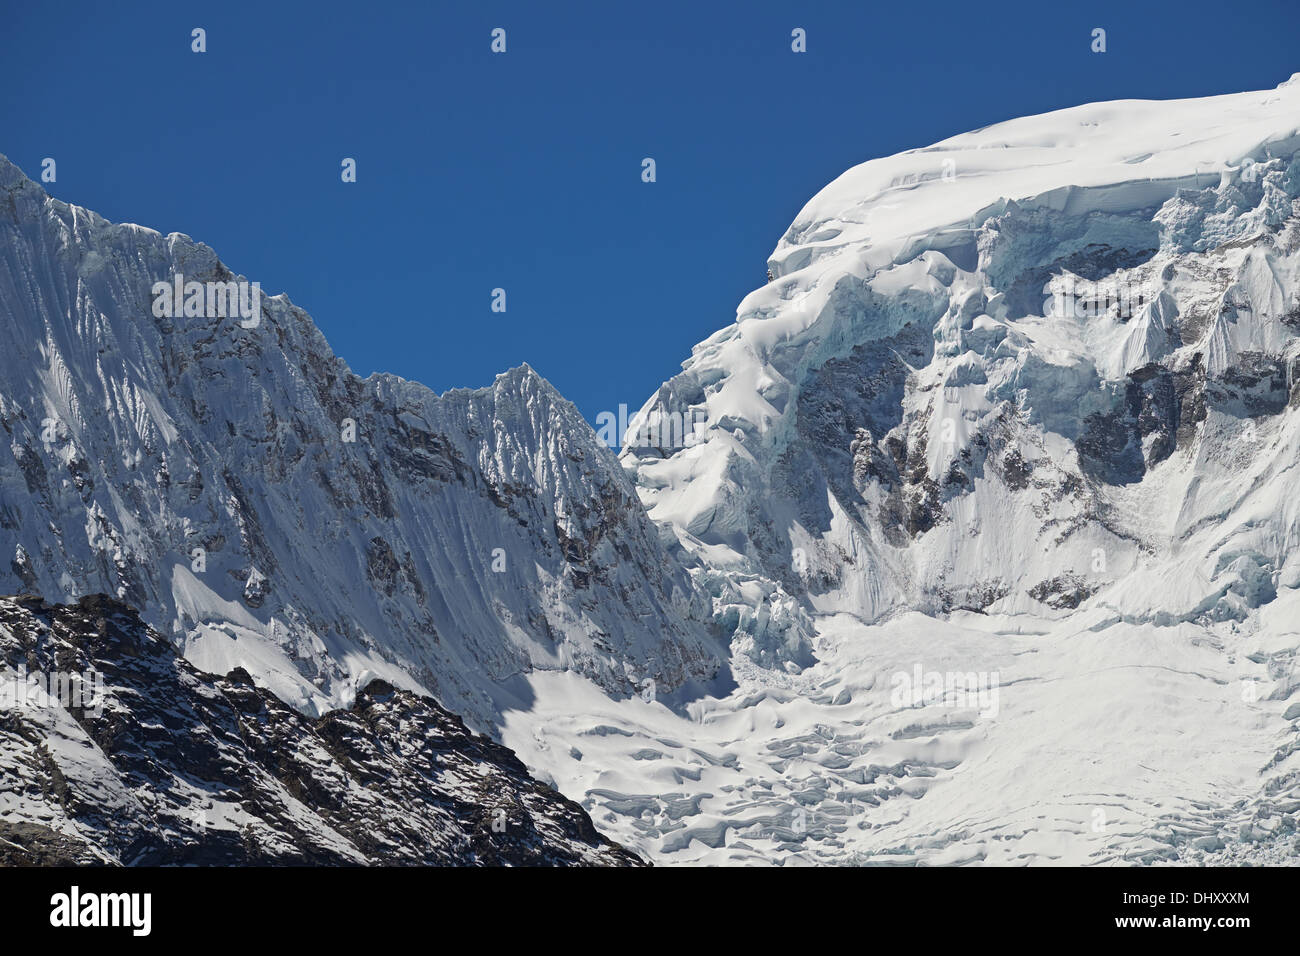 Ranrapalca Summit (6162m) & Ocshapalca (5888m) in the Peruvian Andes. Stock Photo